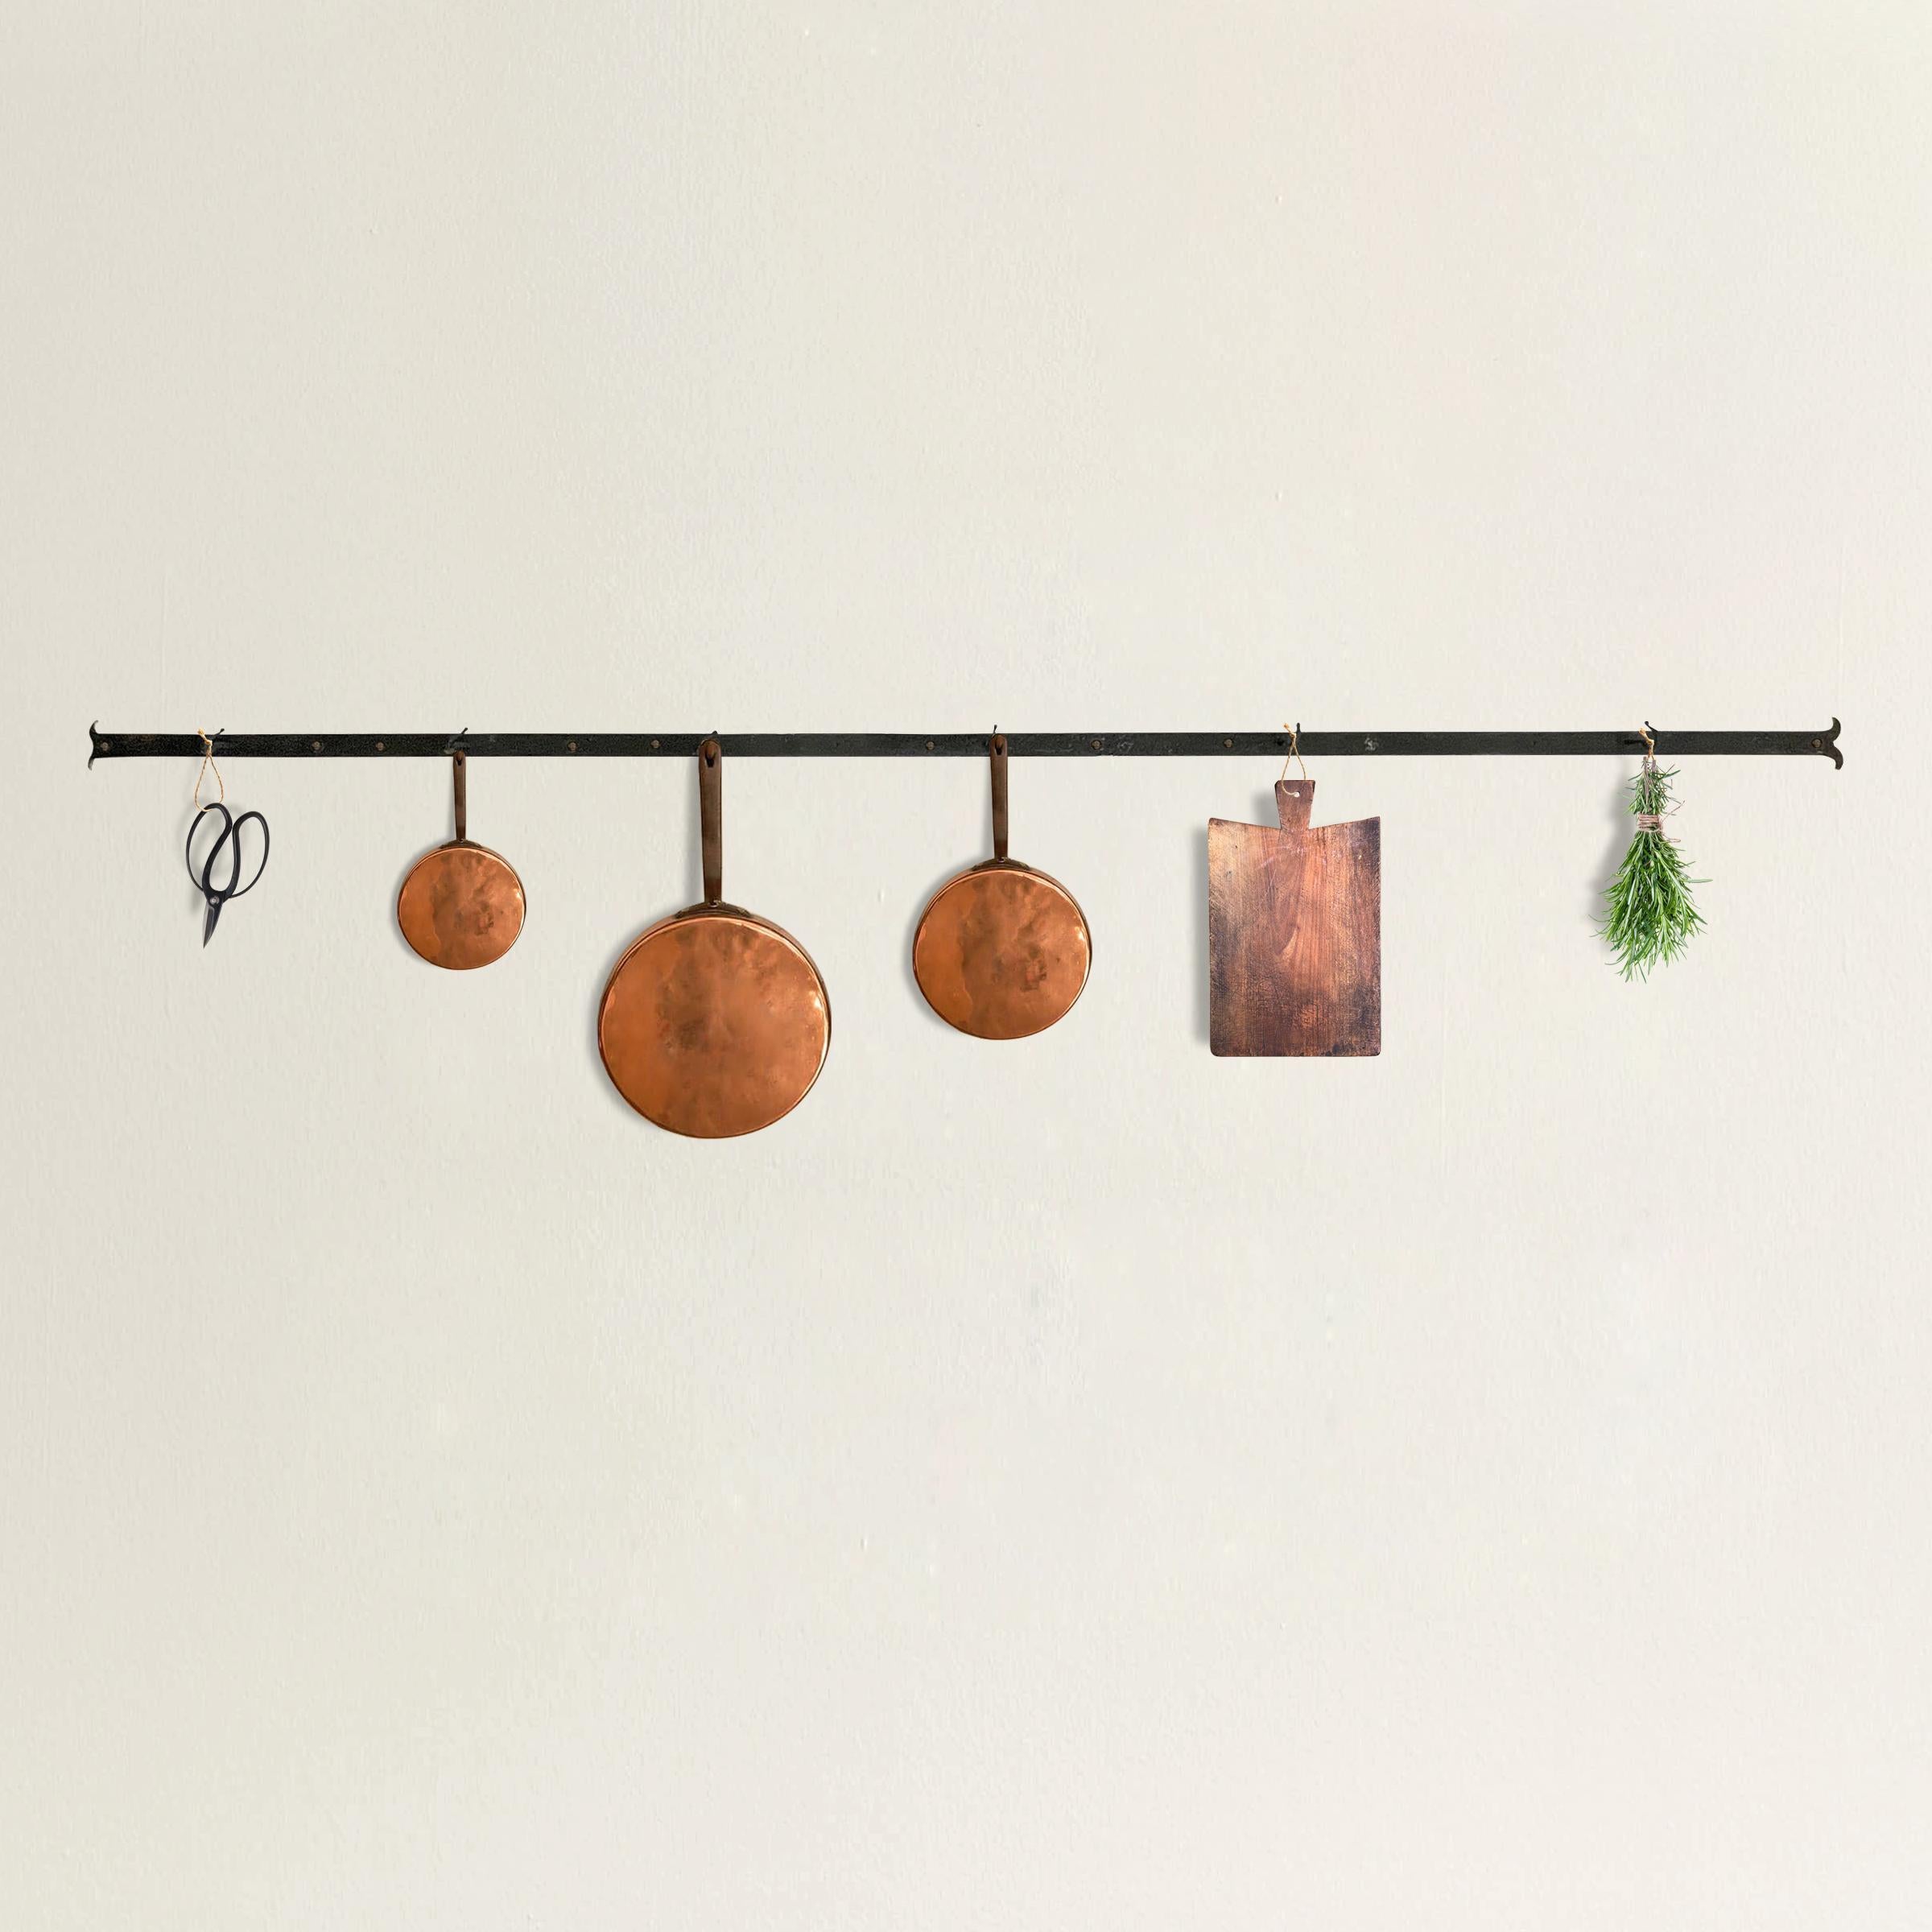 A simple yet refined early 20th century French wrought-iron wall-mounted pot rack with six hooks. Perfect for hanging on the wall above your stove to keep pots, lids, cutting boards, or any myriad things at your finger tips in the kitchen.